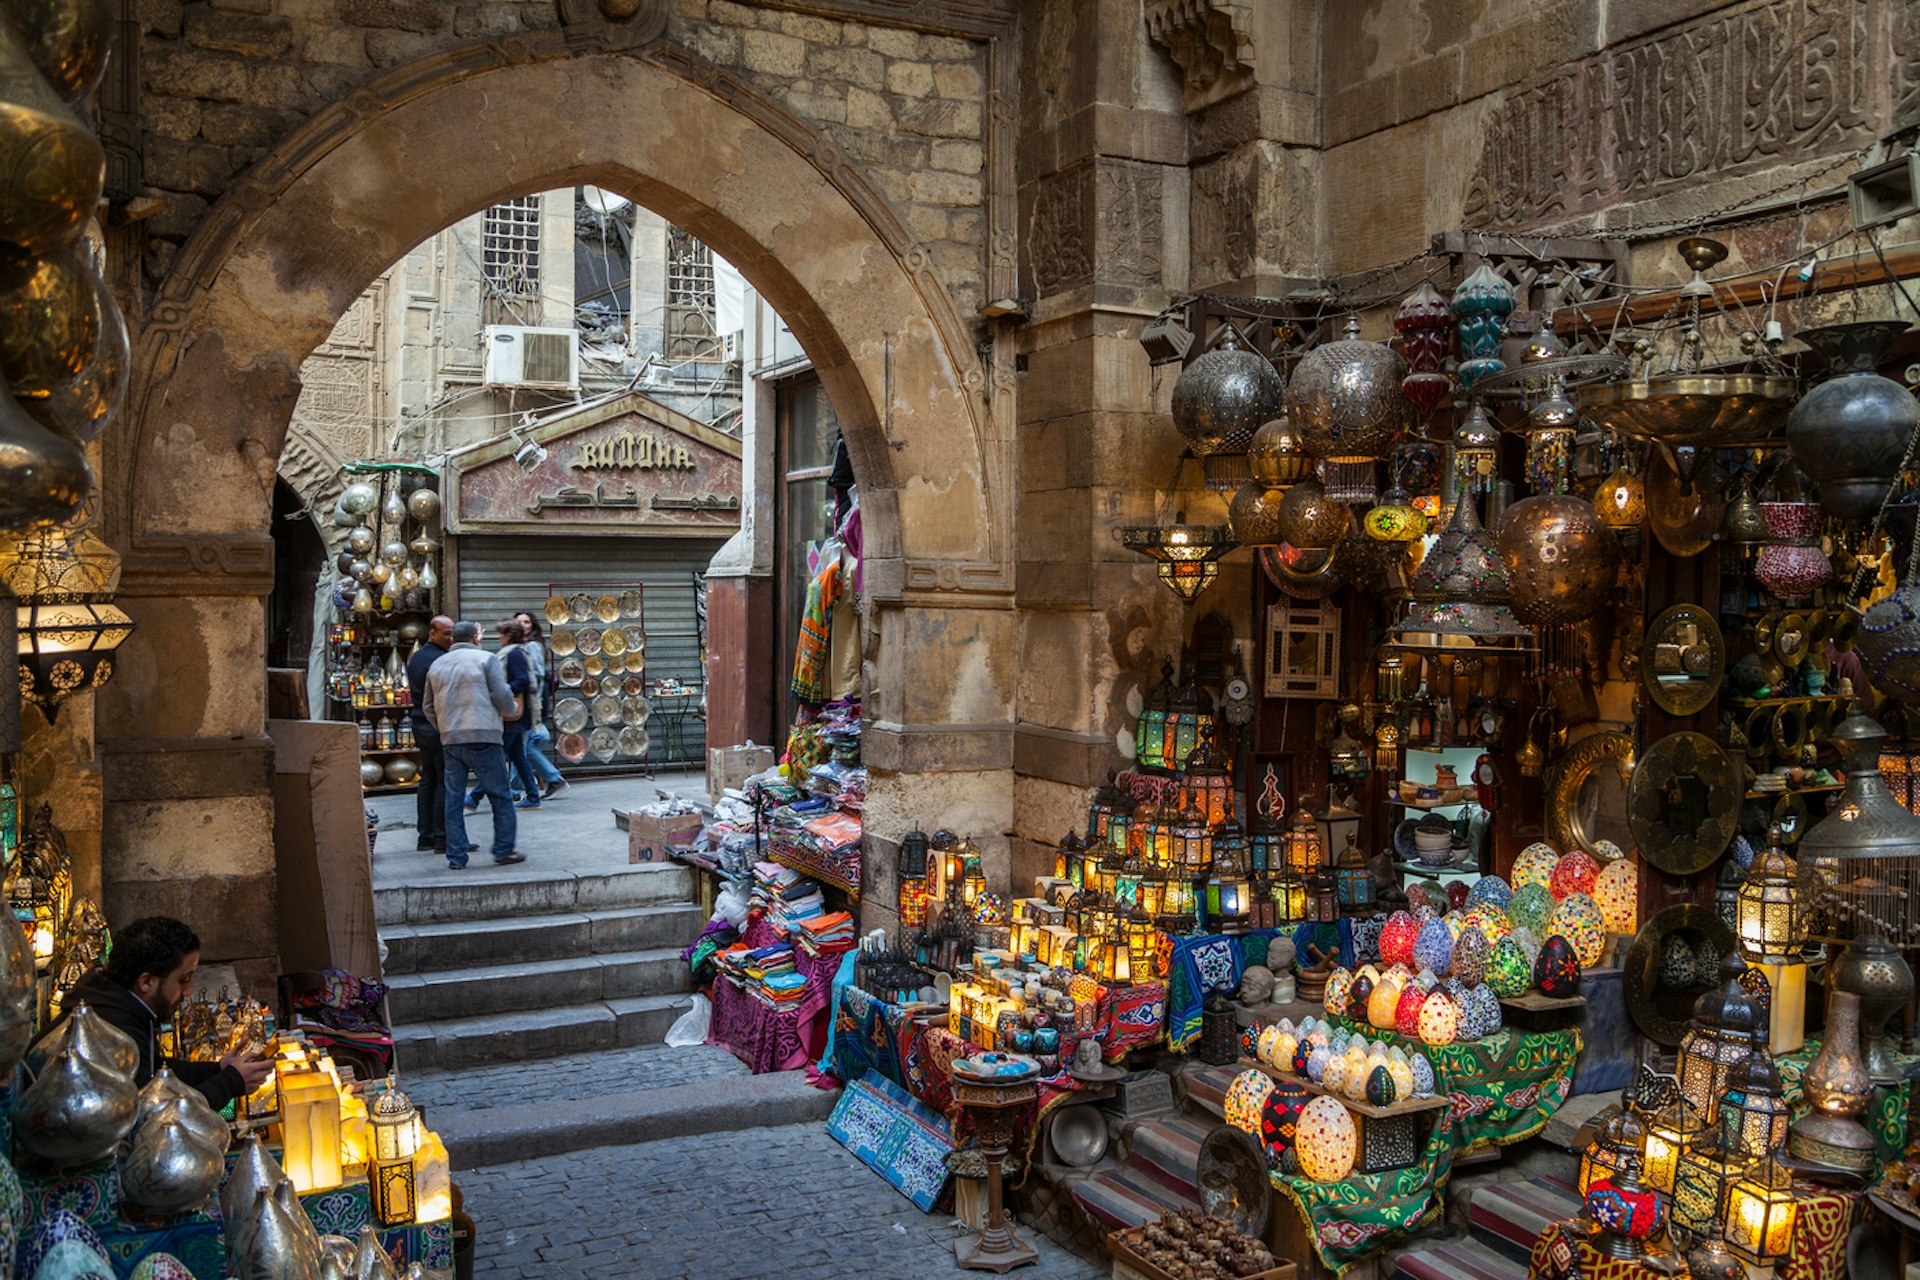 A stall packed with lamps and lanterns in a souk with another pathway leading to more stalls through an arched doorway